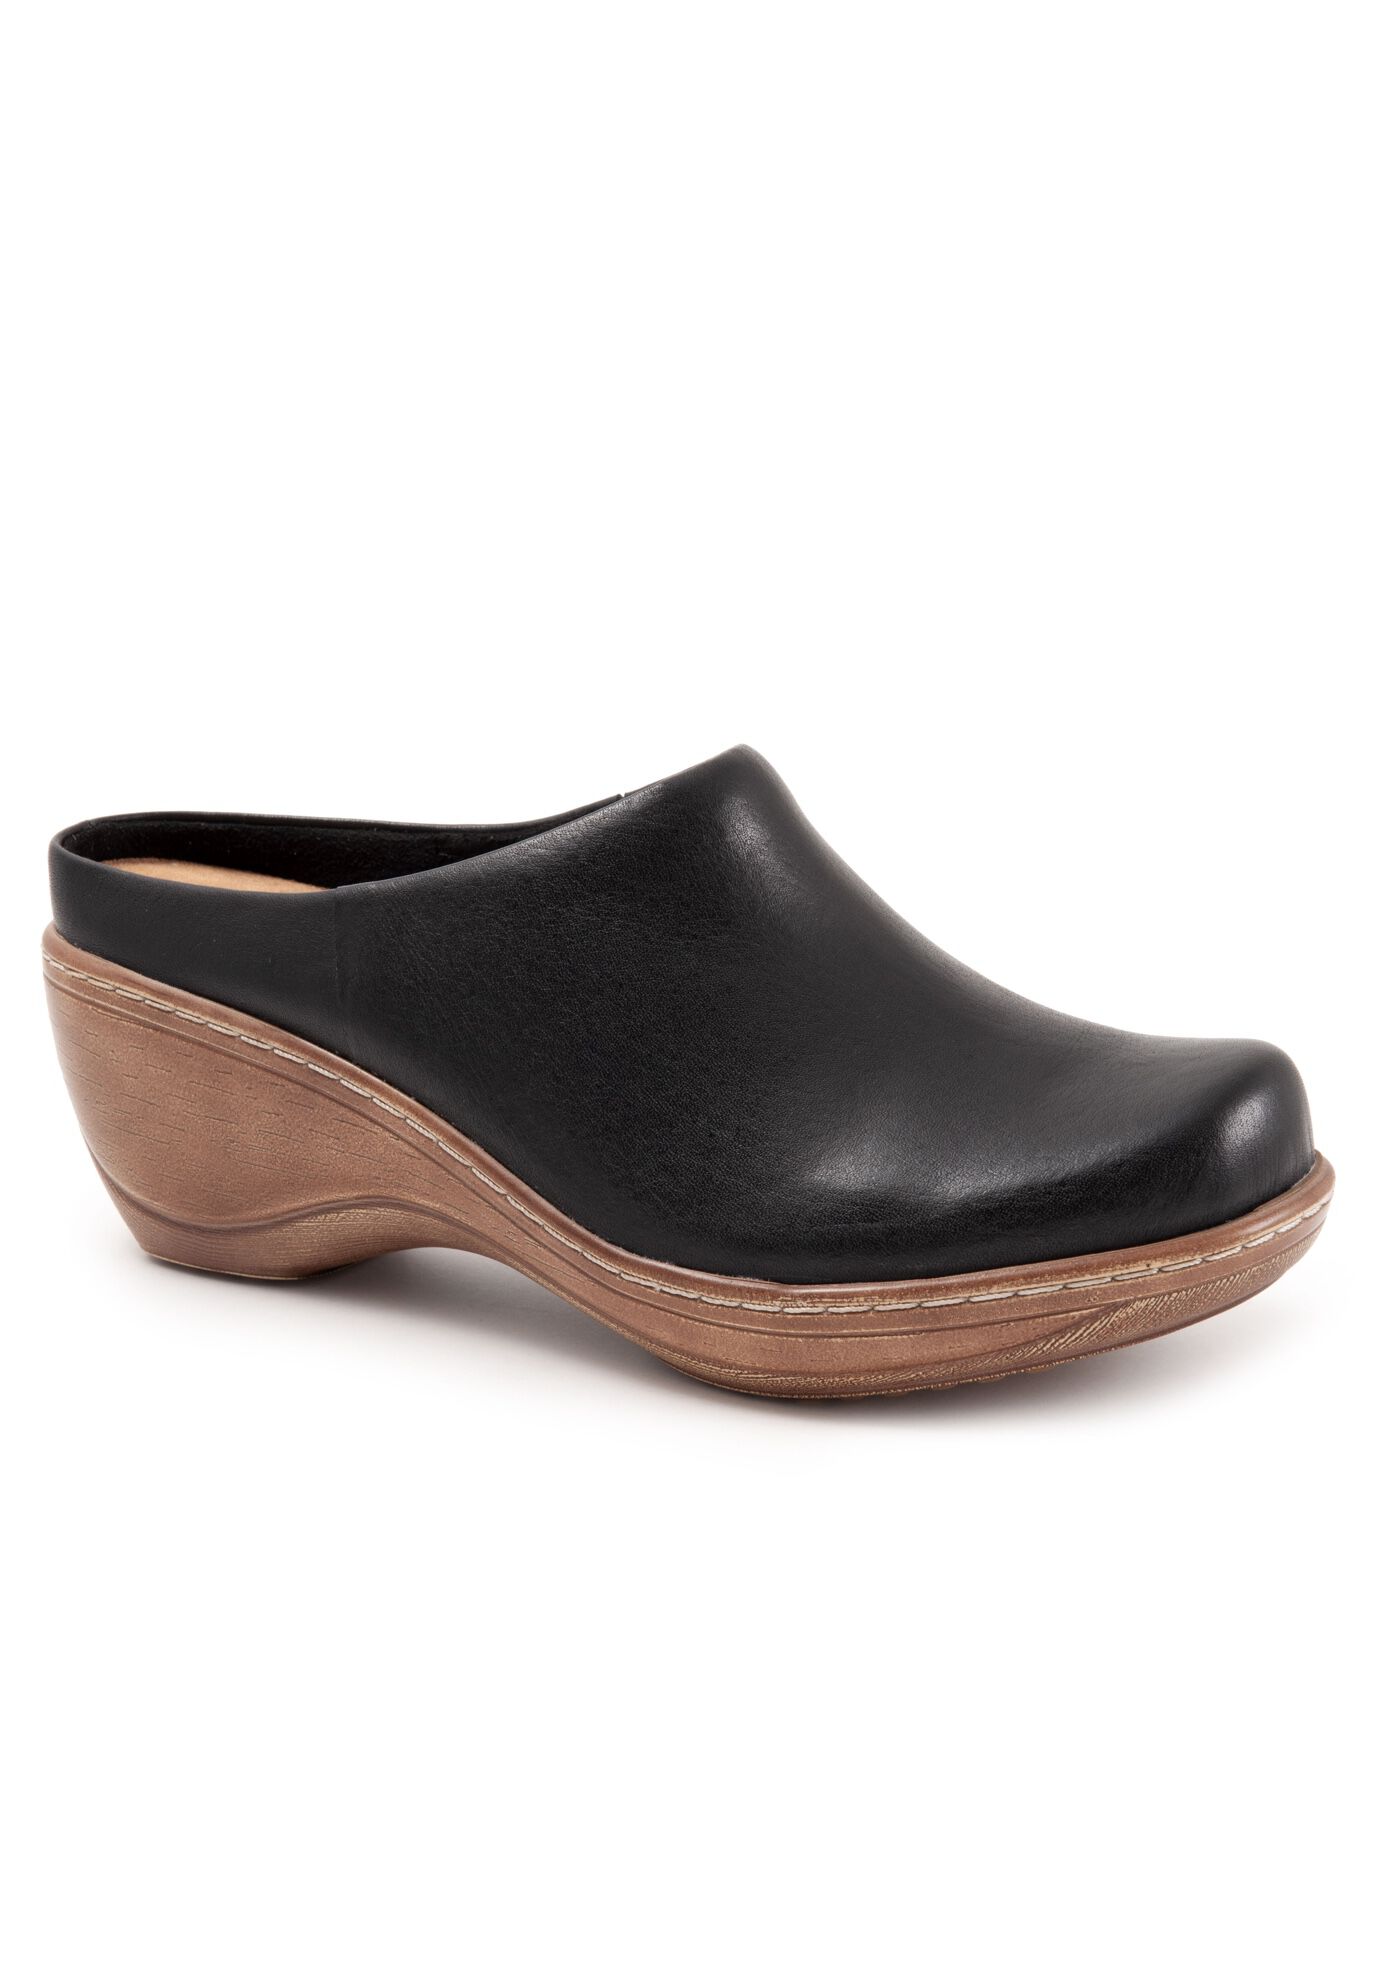 Extra Wide Width Women's Madison Clog by SoftWalk in Black (Size 8 WW)